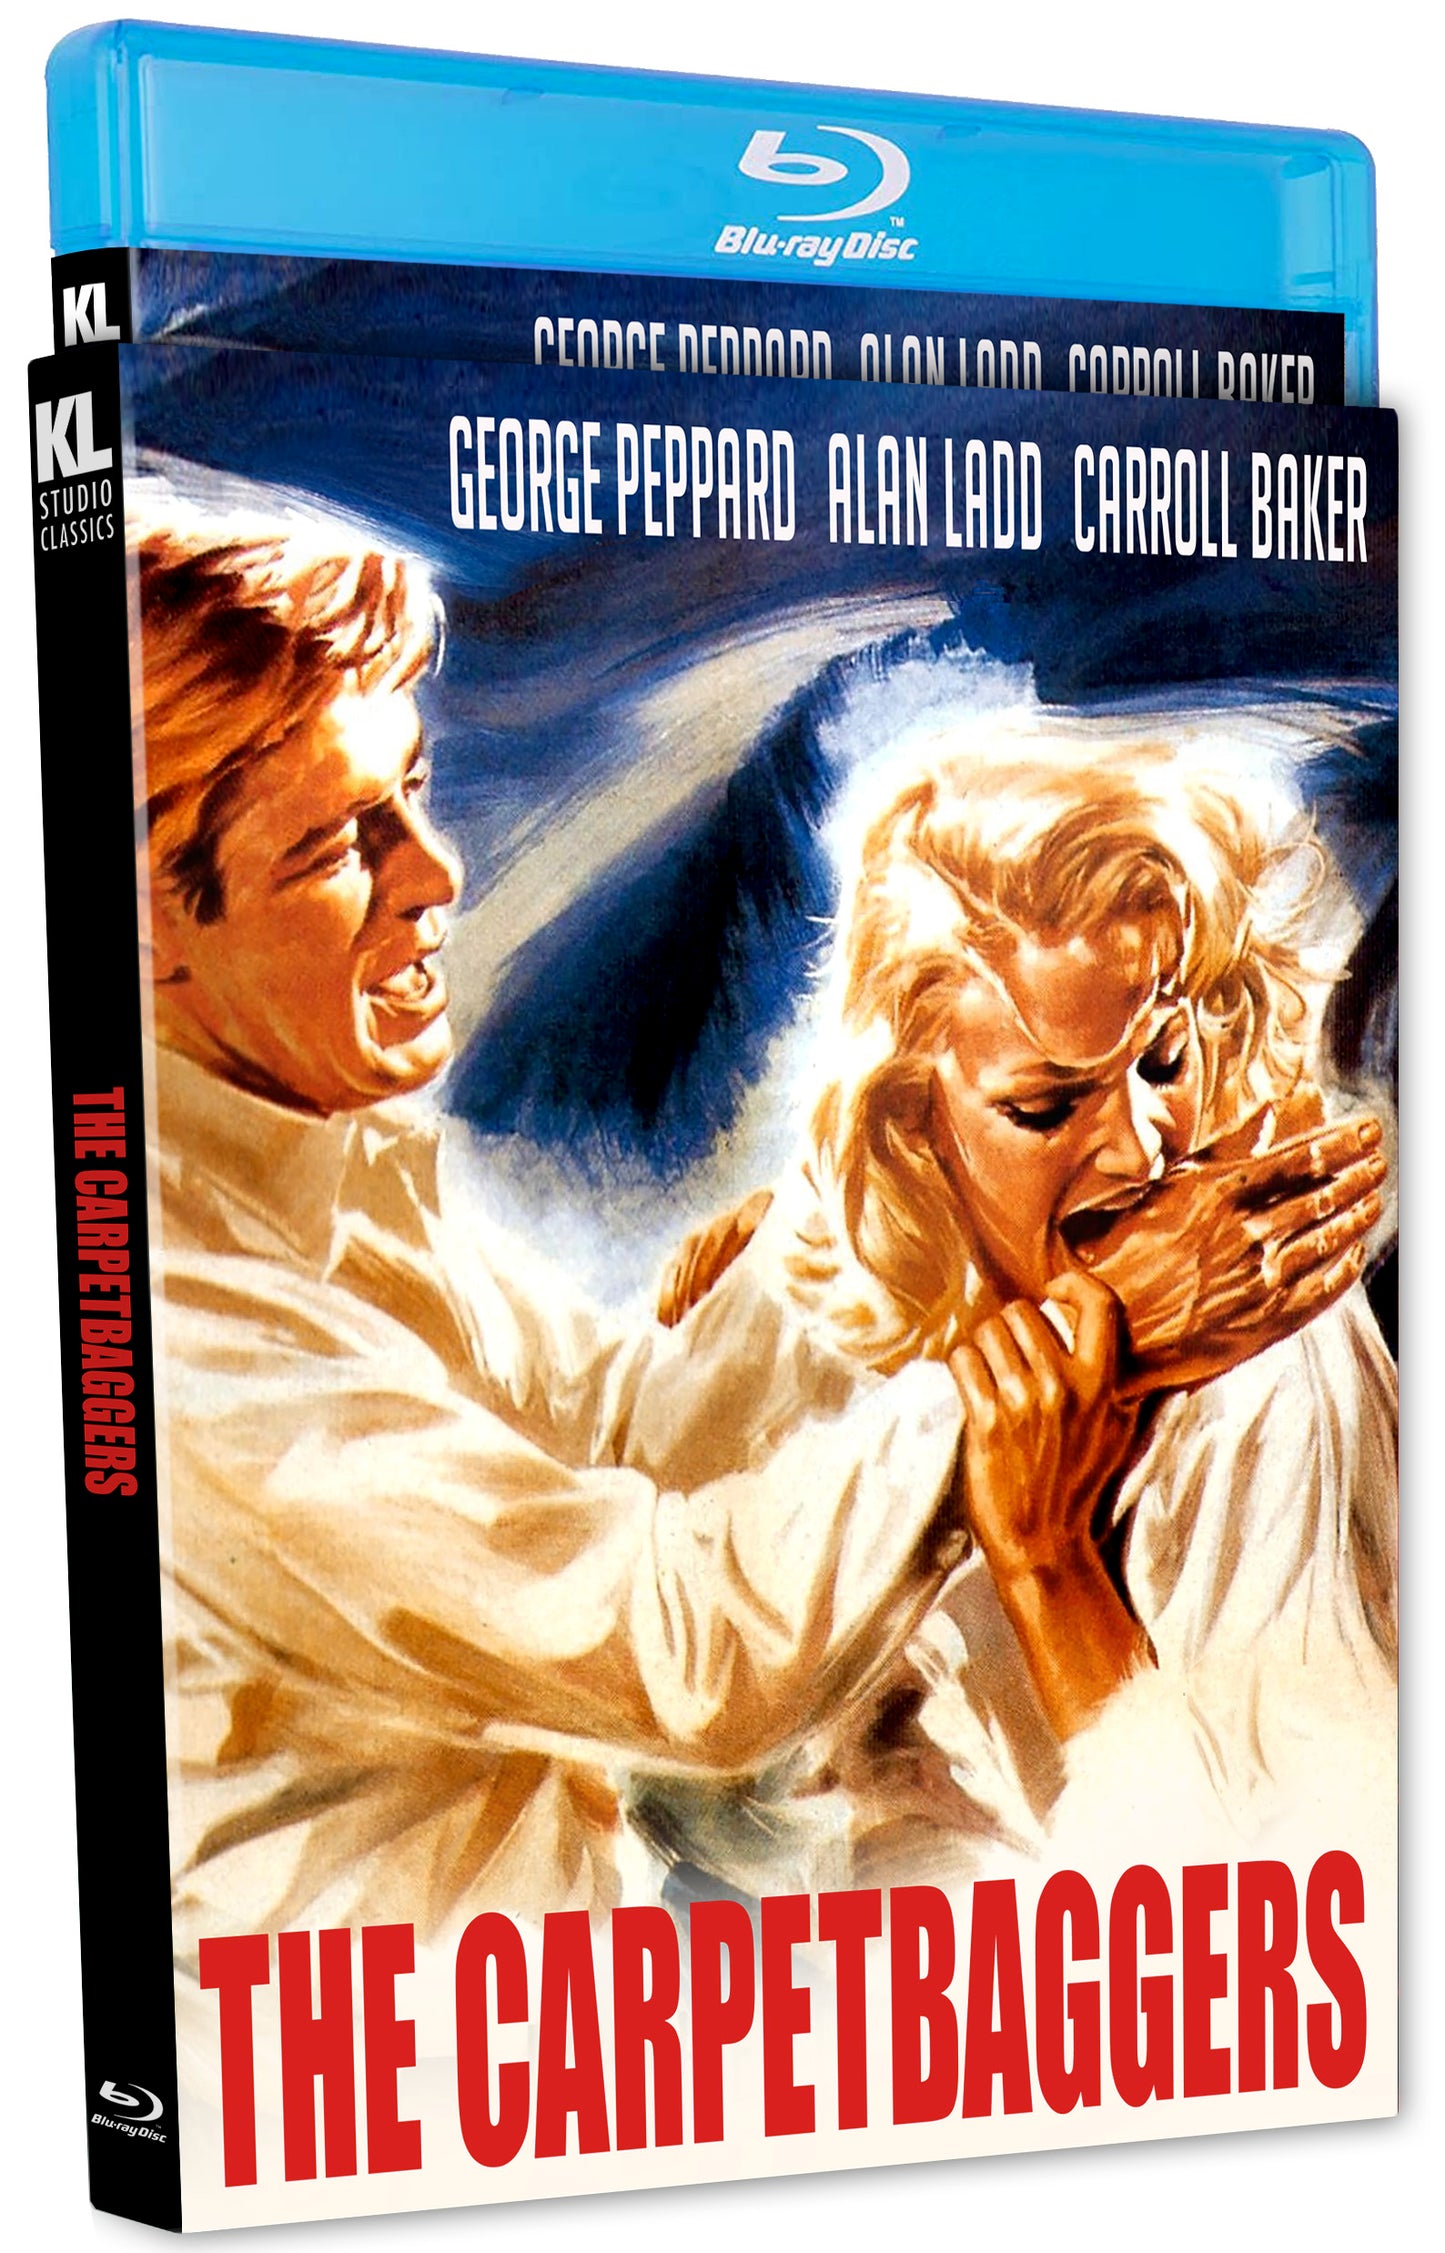 The Carpetbaggers Blu-ray with Slipcover (Kino Lorber)